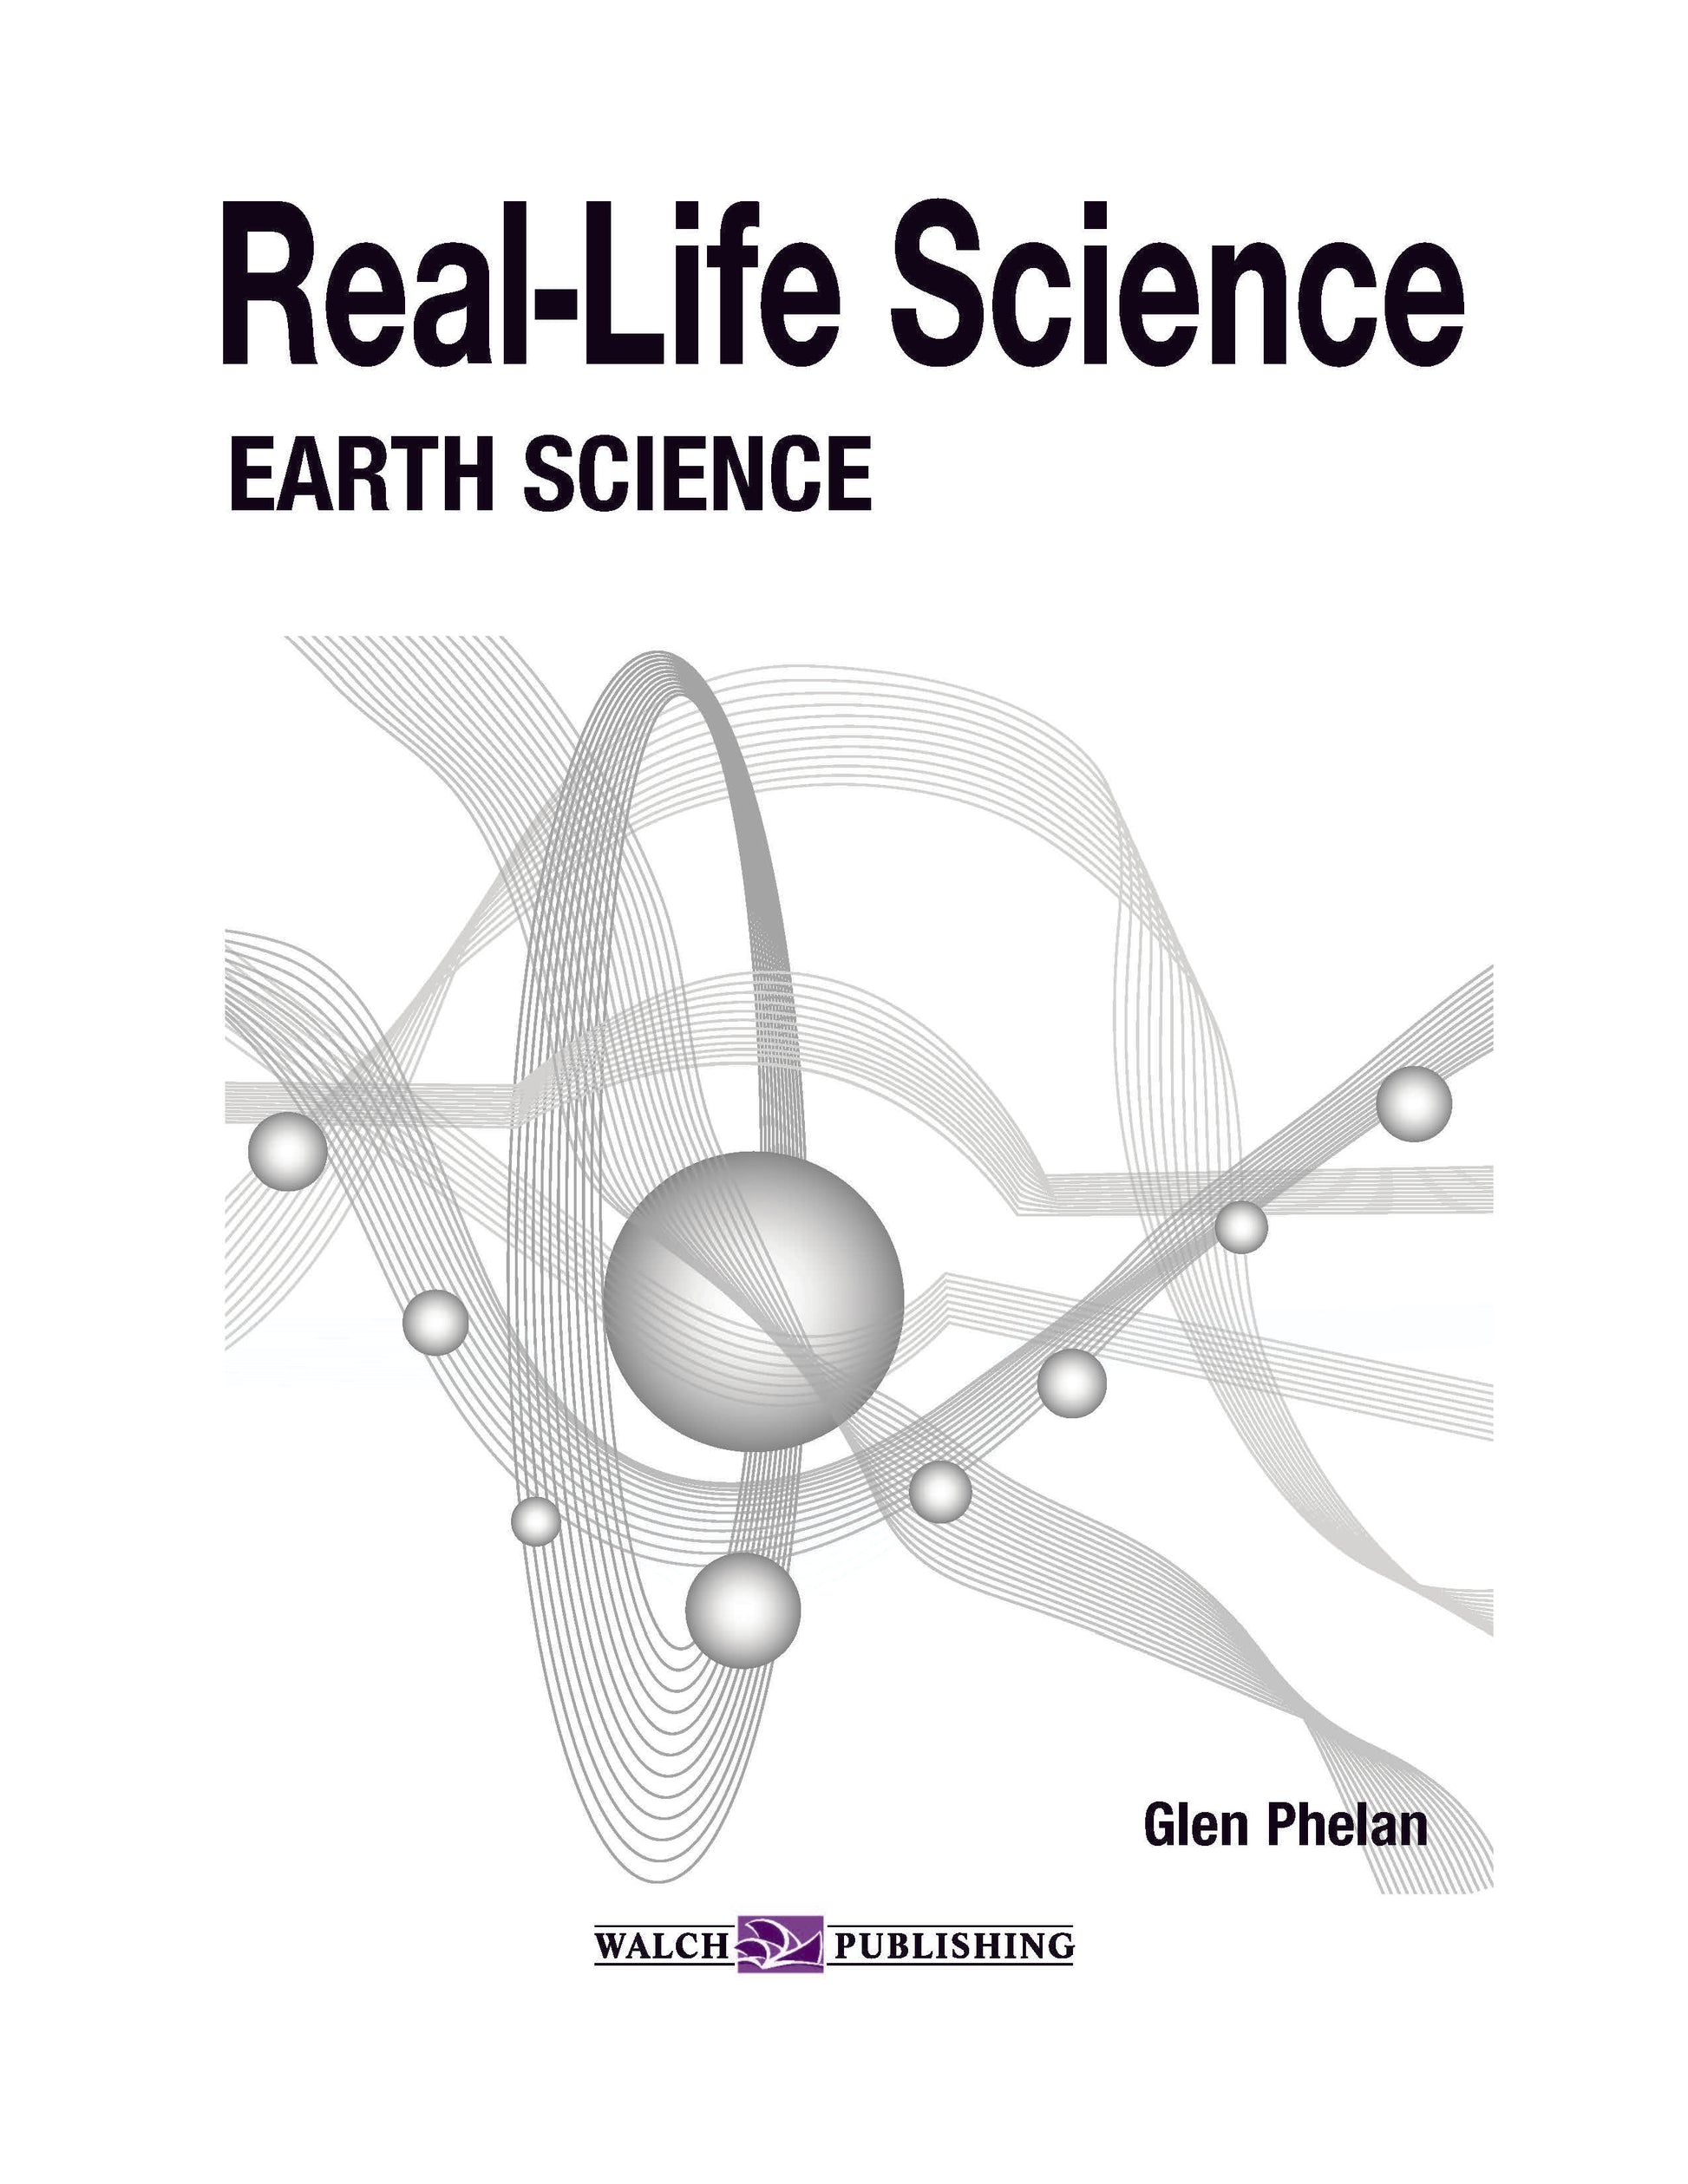 Real Life Science Series, Earth Science Curriculum, Classroom Learning Materials, National Science Education Standards, Engaging Science Lessons, Hands-On Science Activities, Earth Science Concepts, Student-Centric Learning, Science Education Resources, Comprehensive Science Curriculum, Inquiry-Based Learning, Real-World Science Questions, Special Offer, Science Class Materials, Educational Series, Earth Science Exploration, Curriculum Enhancement, Student Engagement, Science Education Standards,